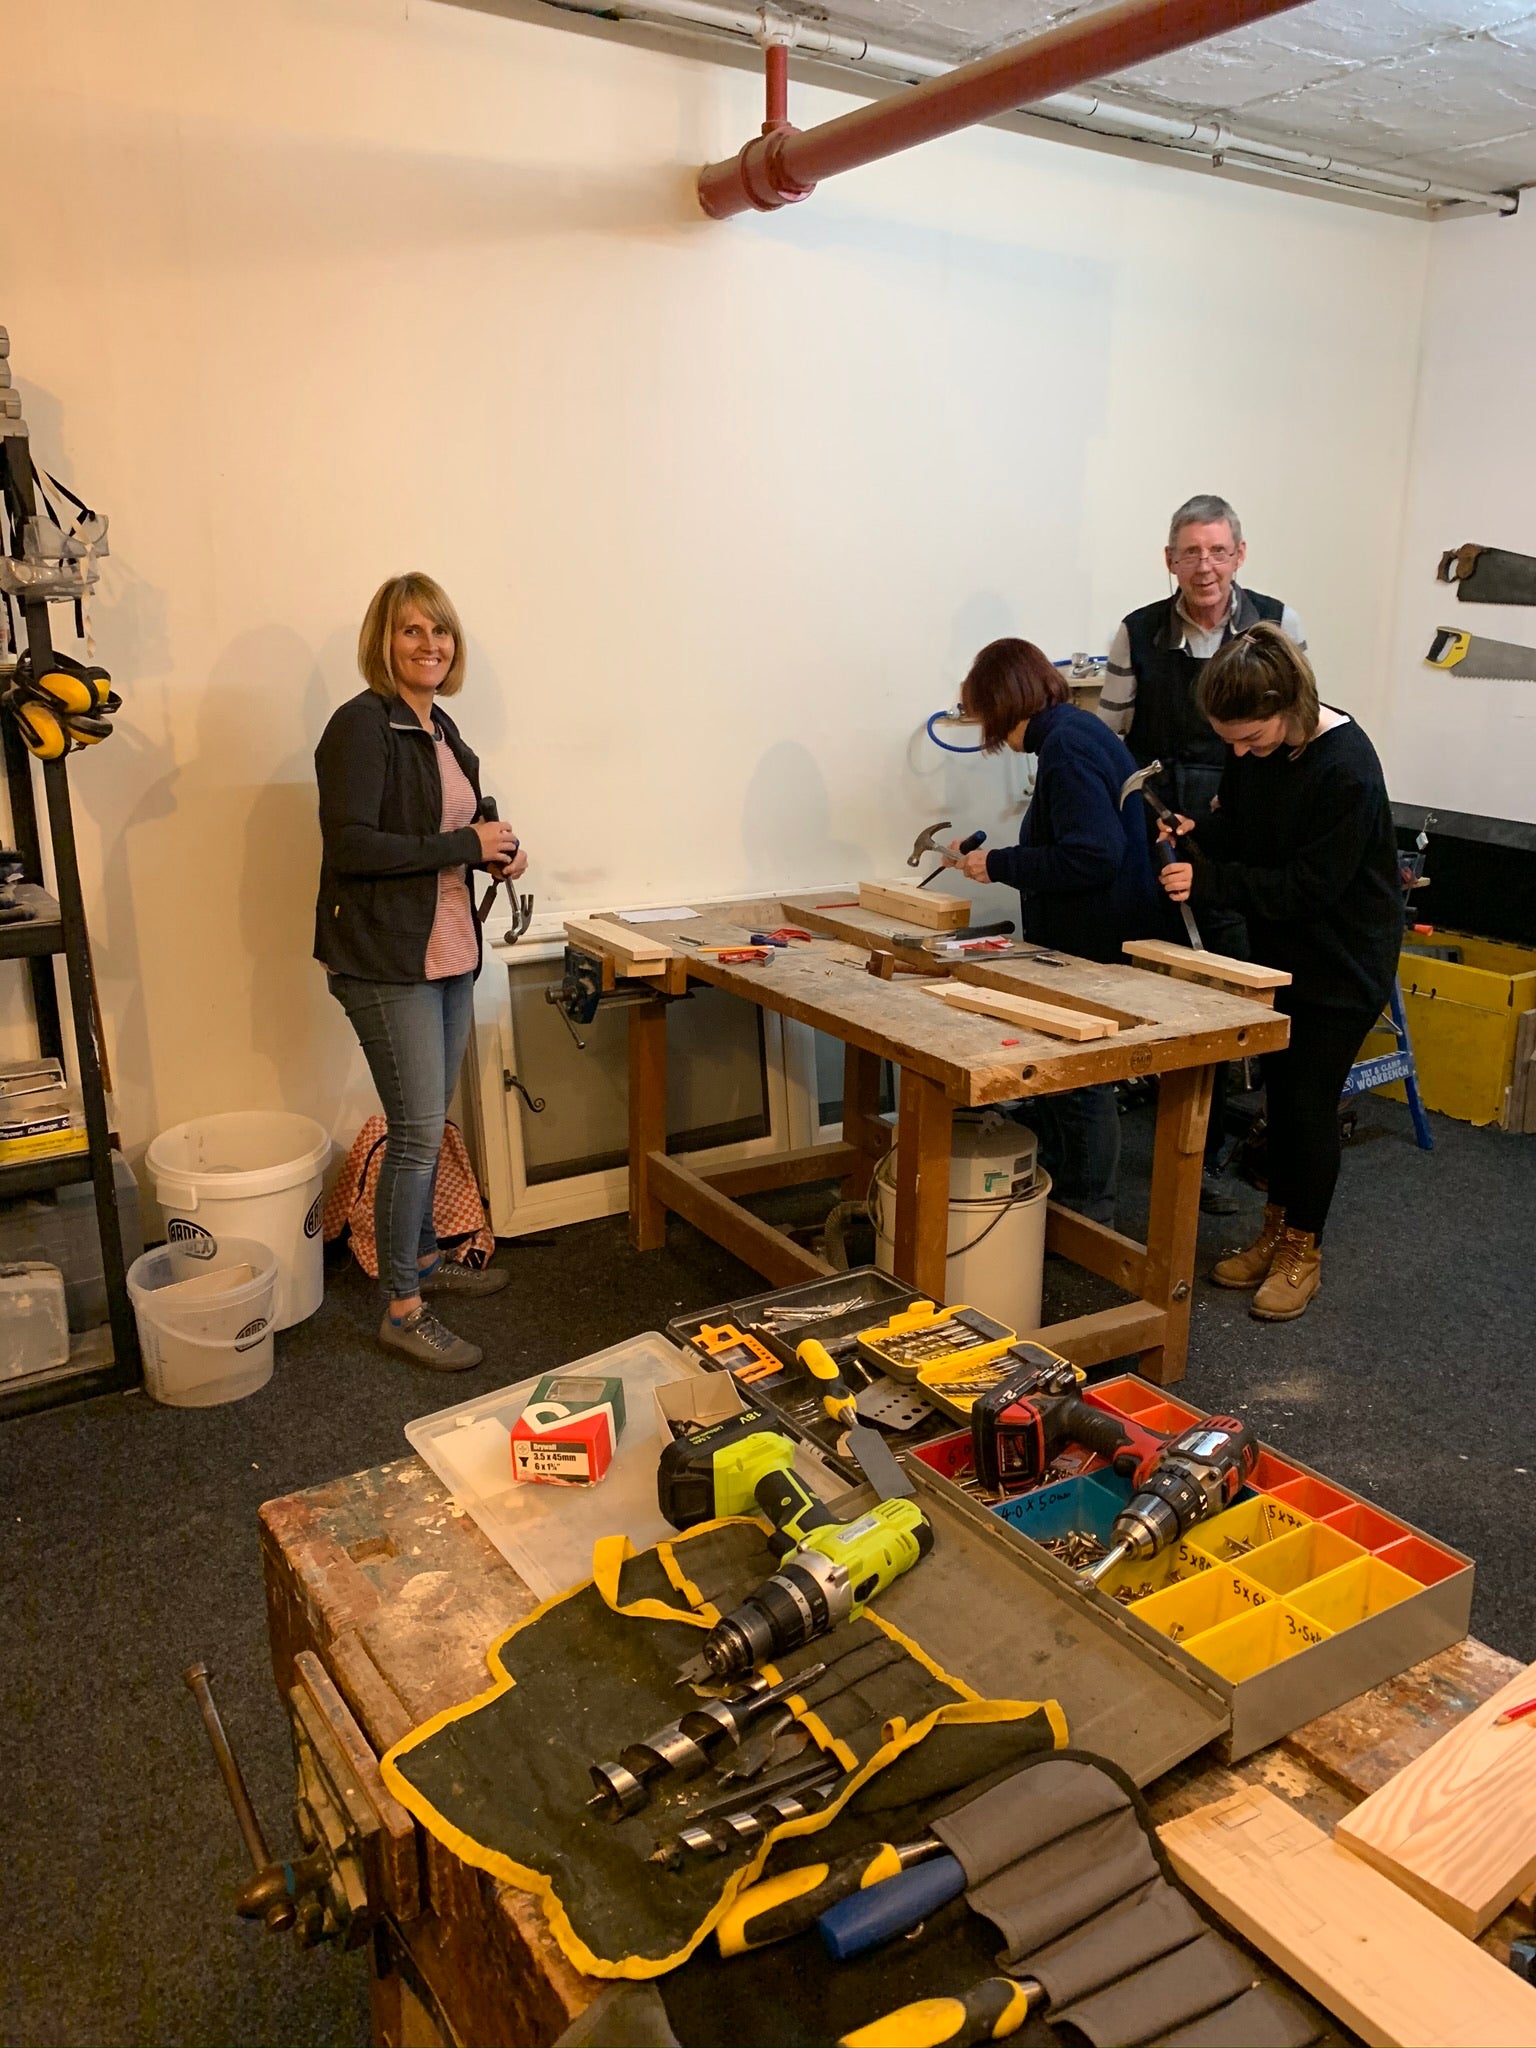 Beginners DIY Course - Hand & Power Tools 1 Day